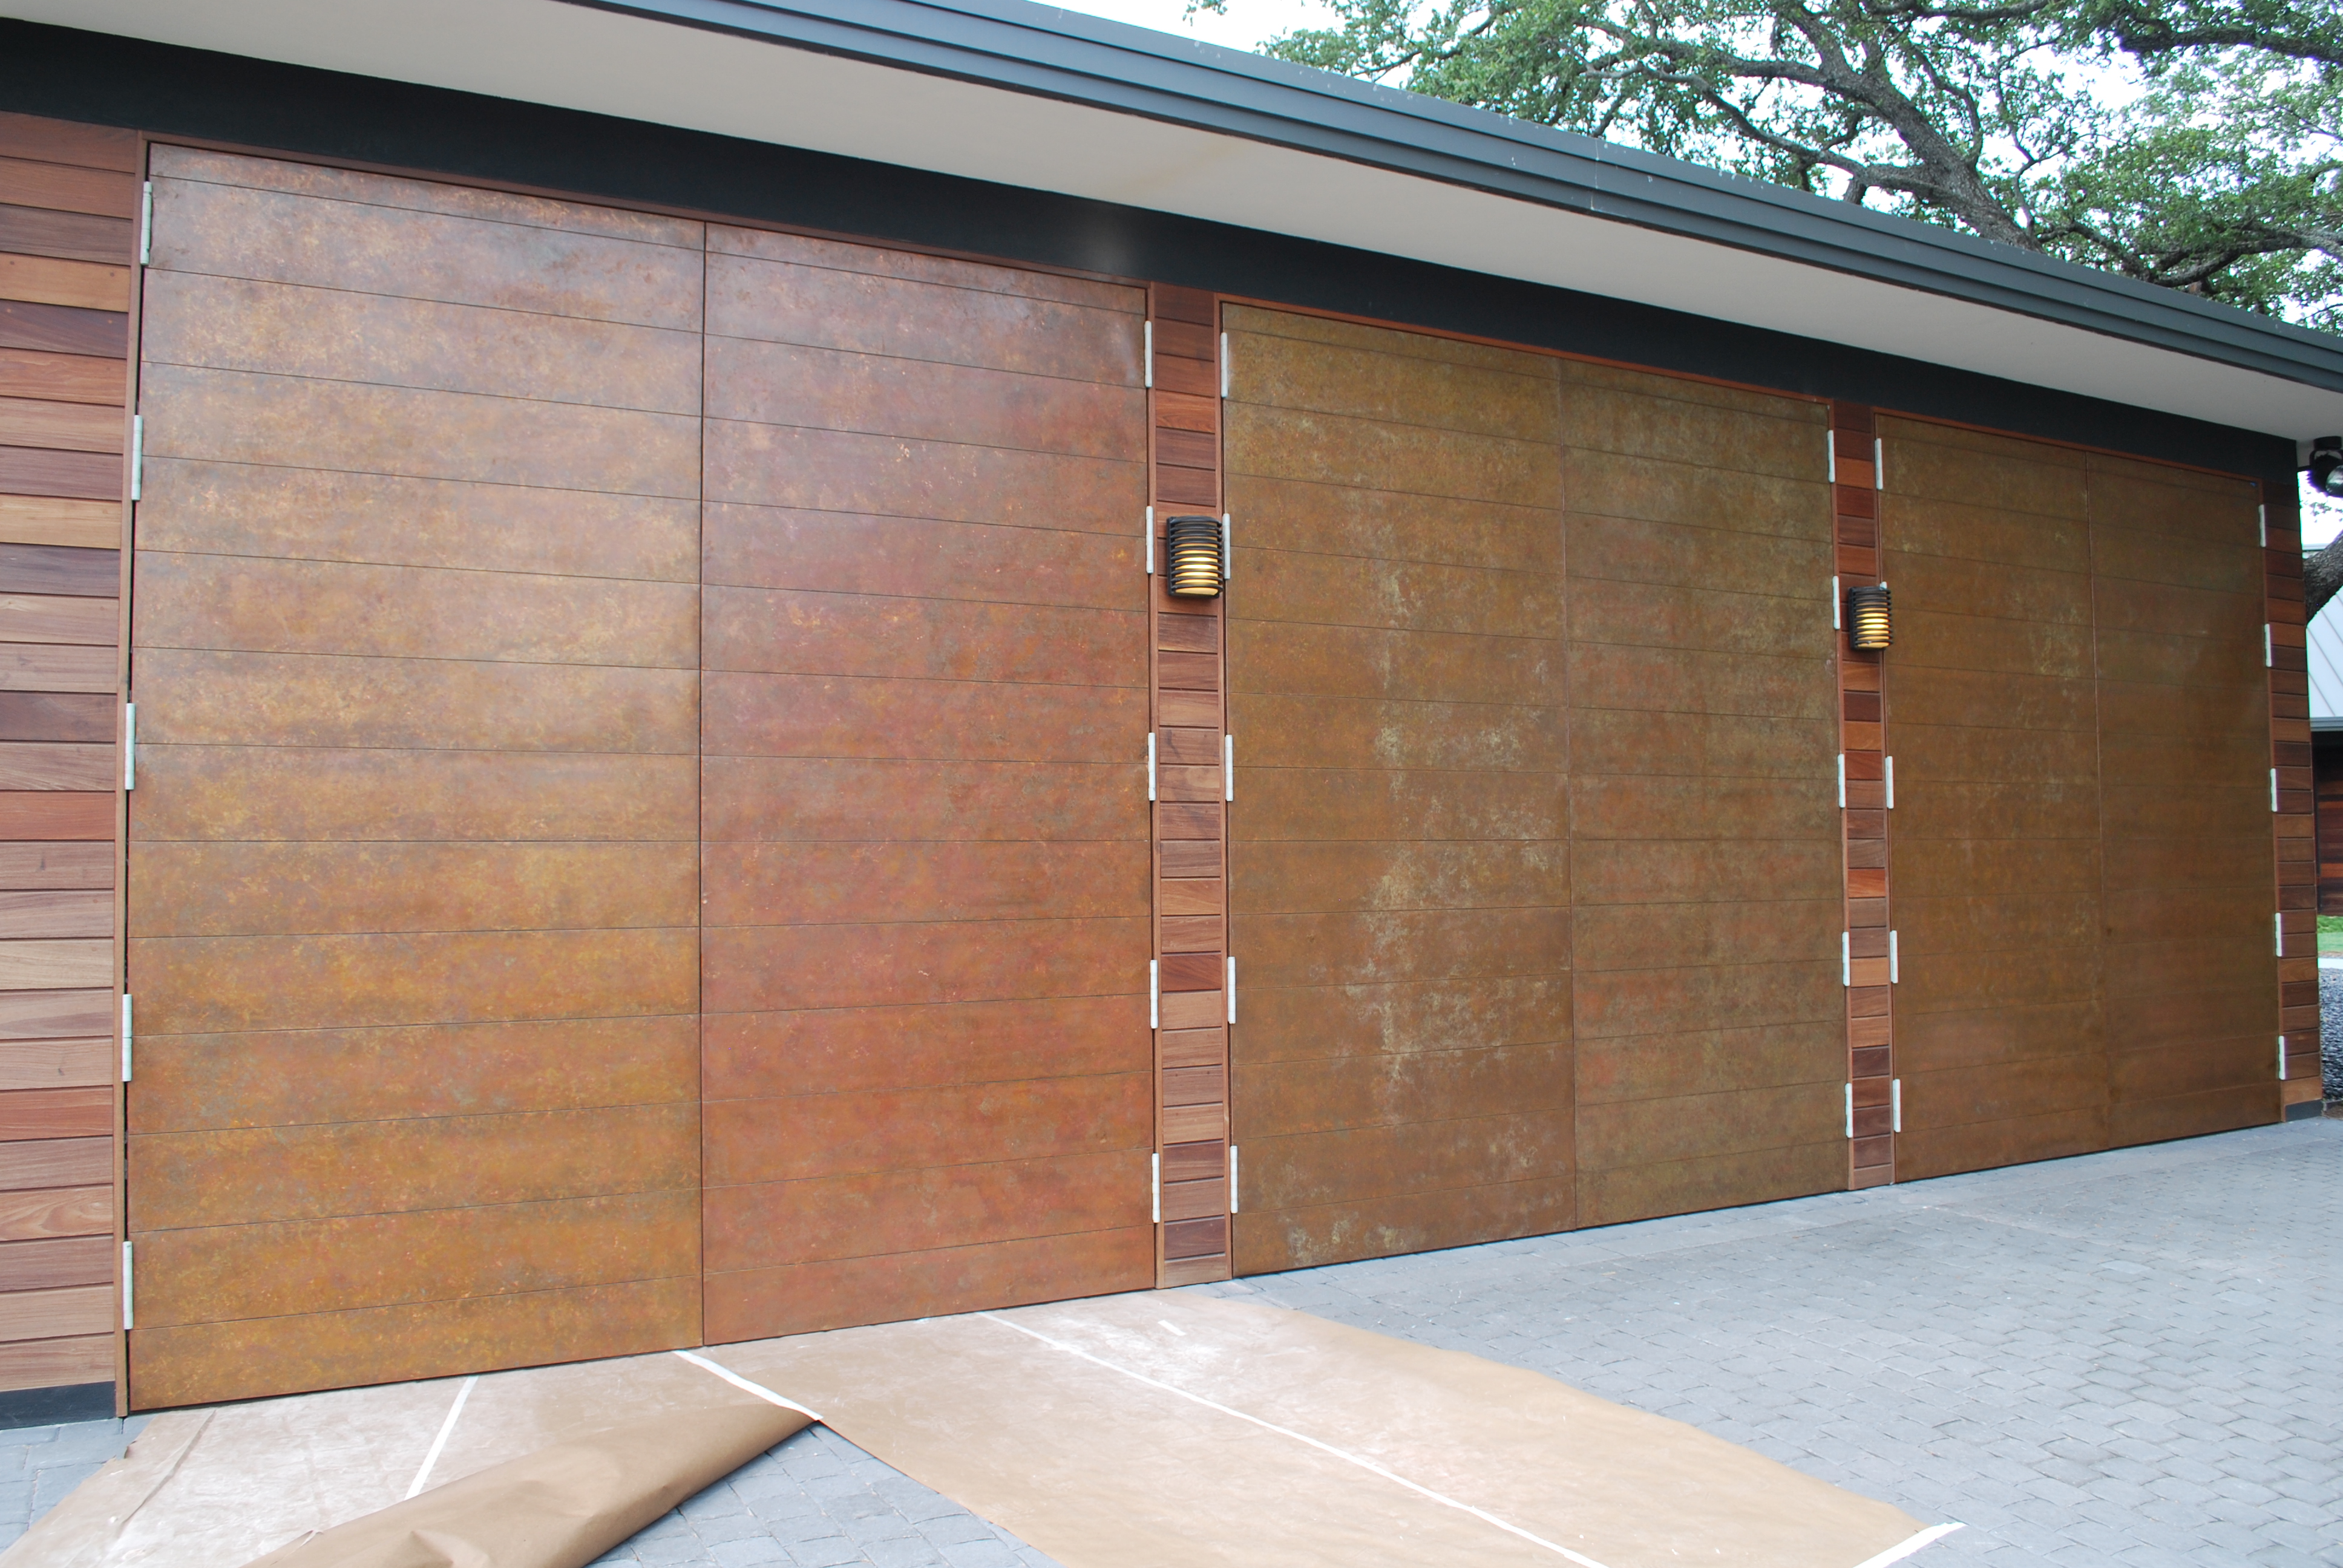 Joshua-Tillery-DD-copper-clad-swing-doors-with-individual-panels-to-match-siding-2